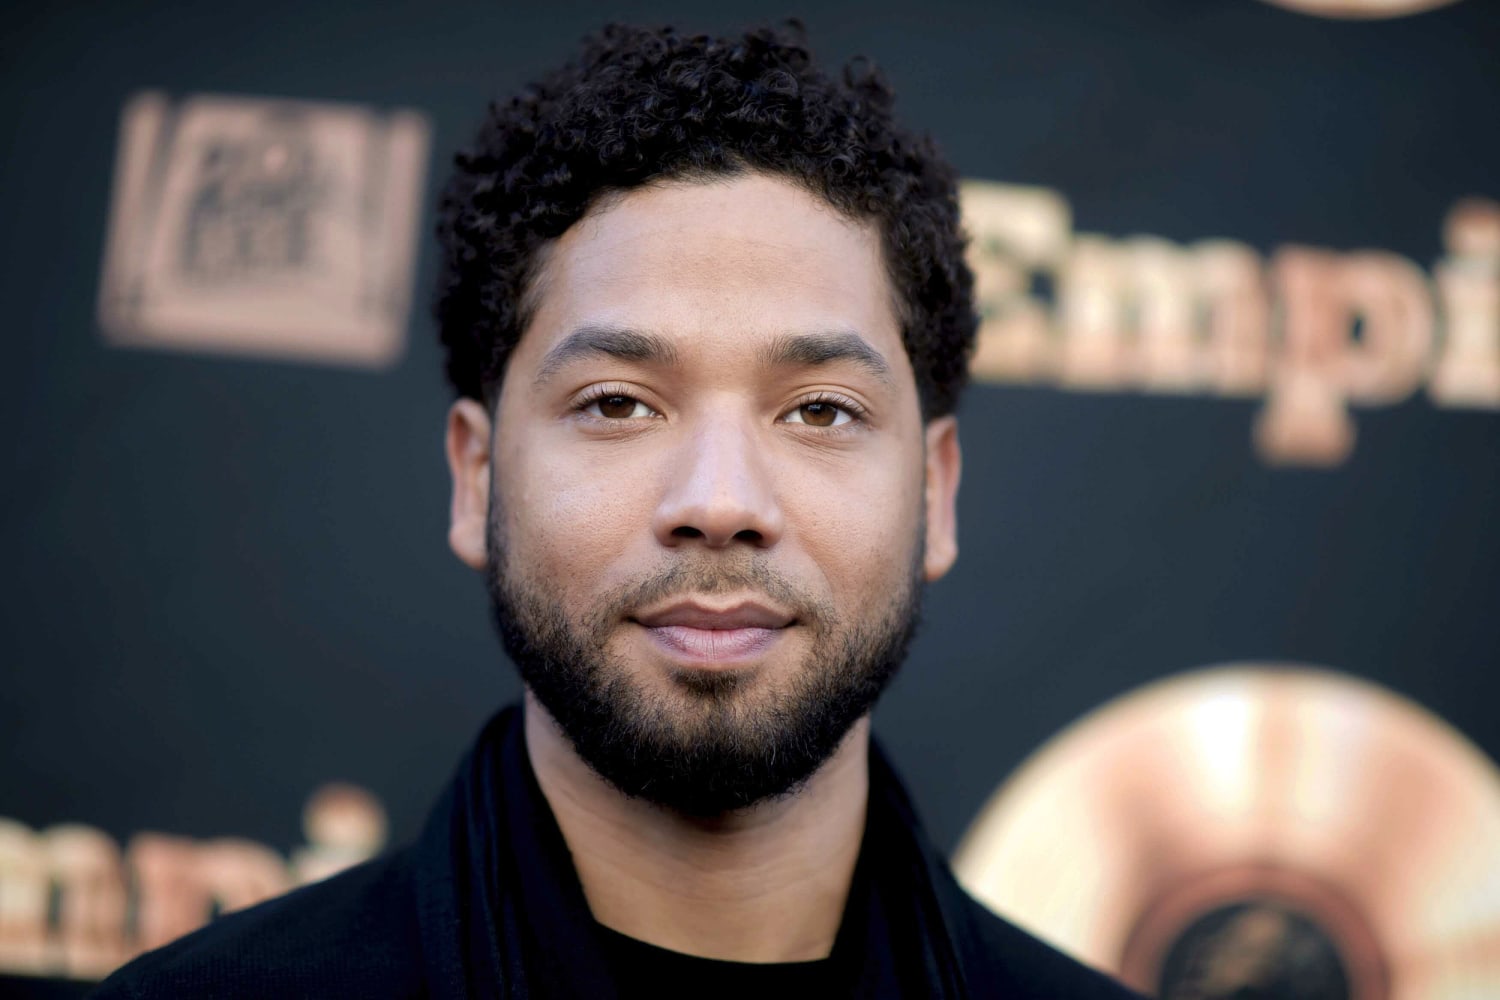 Justice for Jussie Smollett case going to trial in November 2021